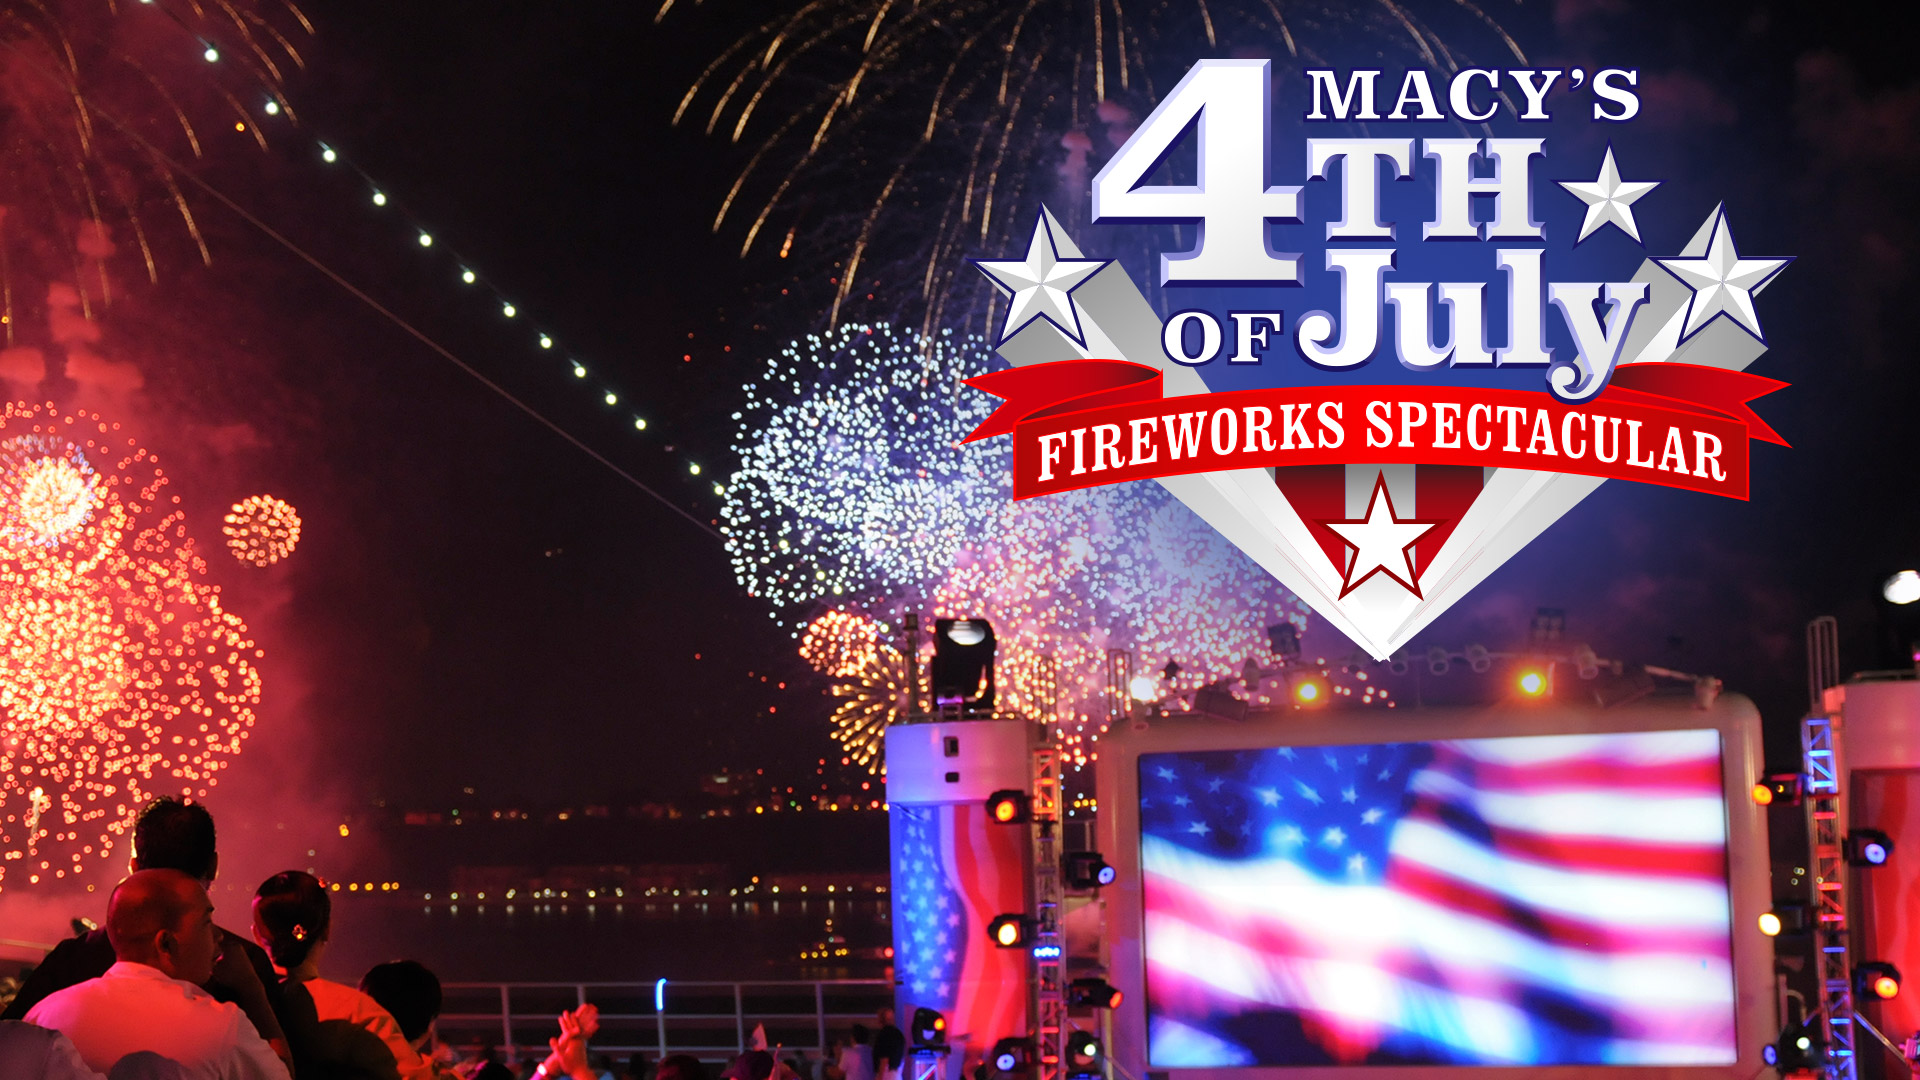 Macy's 4th of July Fireworks Spectacular | NBC